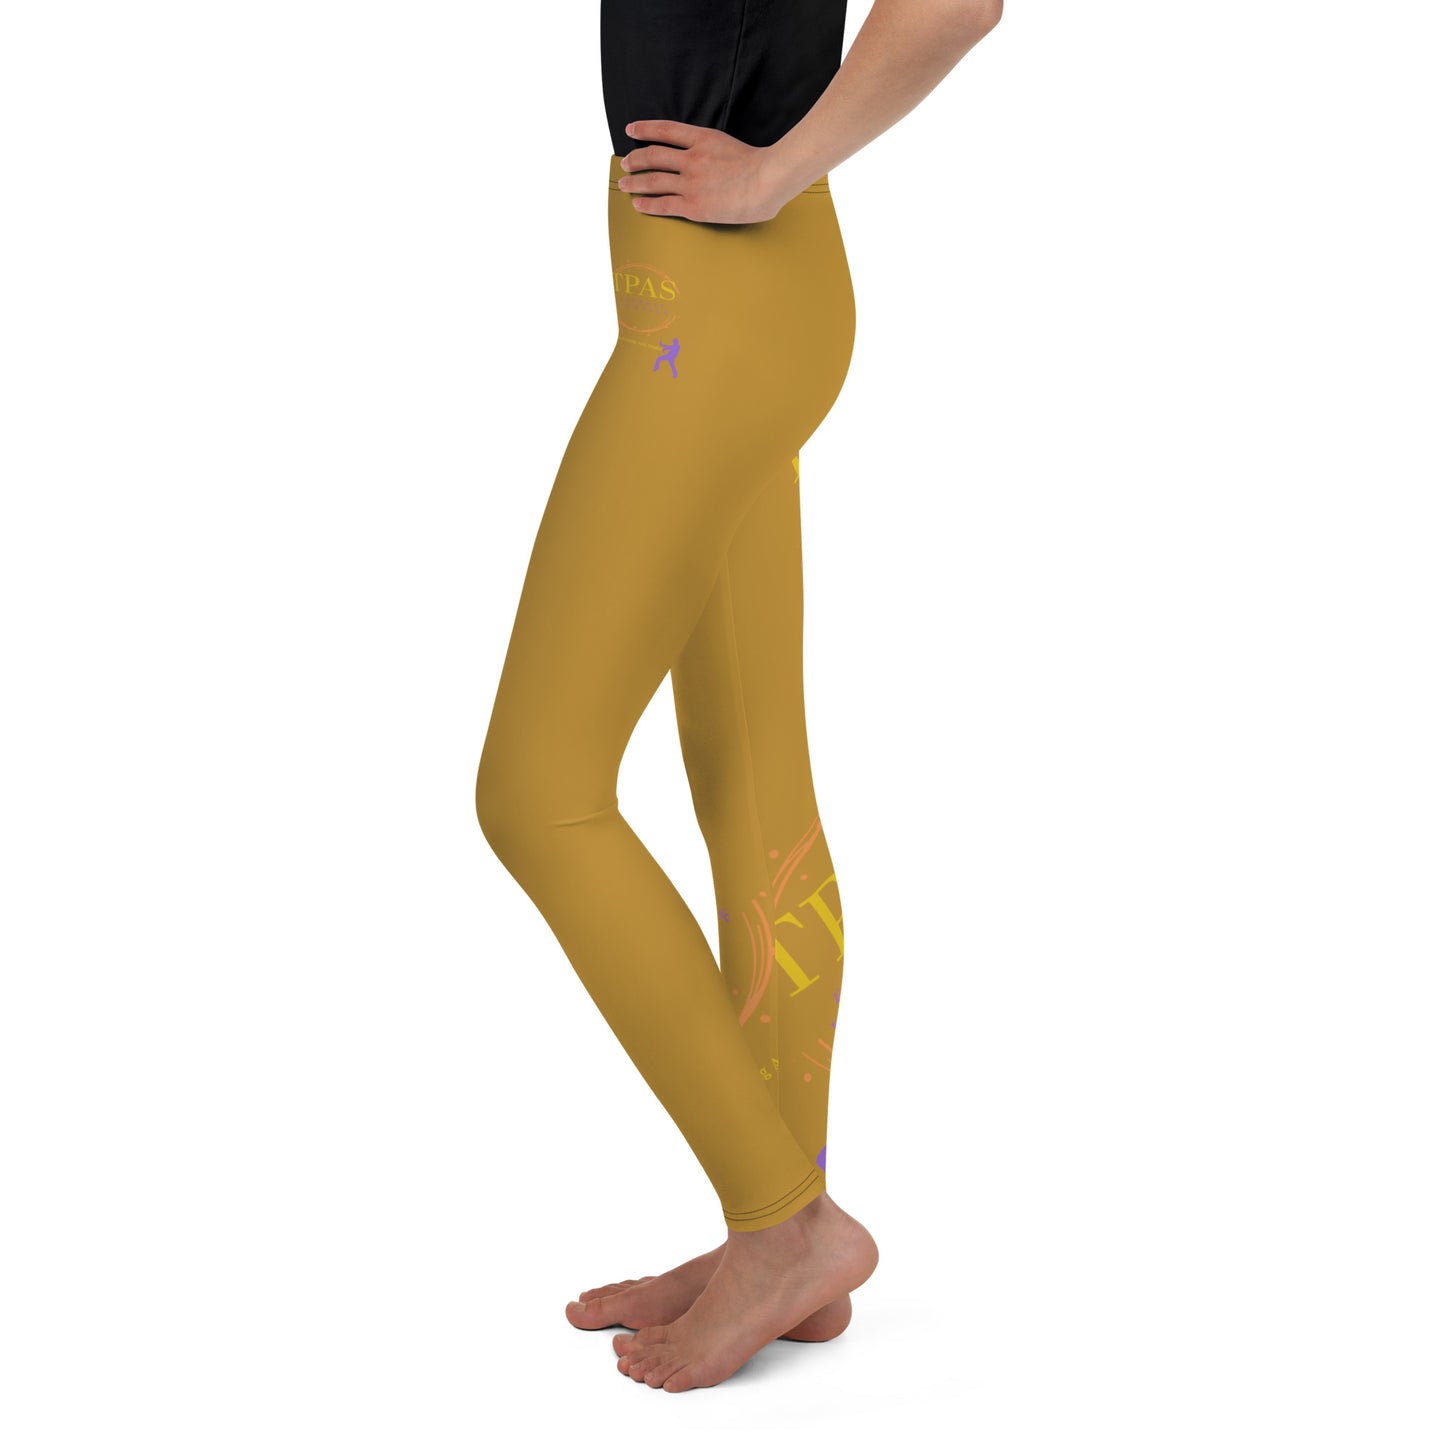 TPAS Competition Team Youth Leggings (Sizes 8-16)